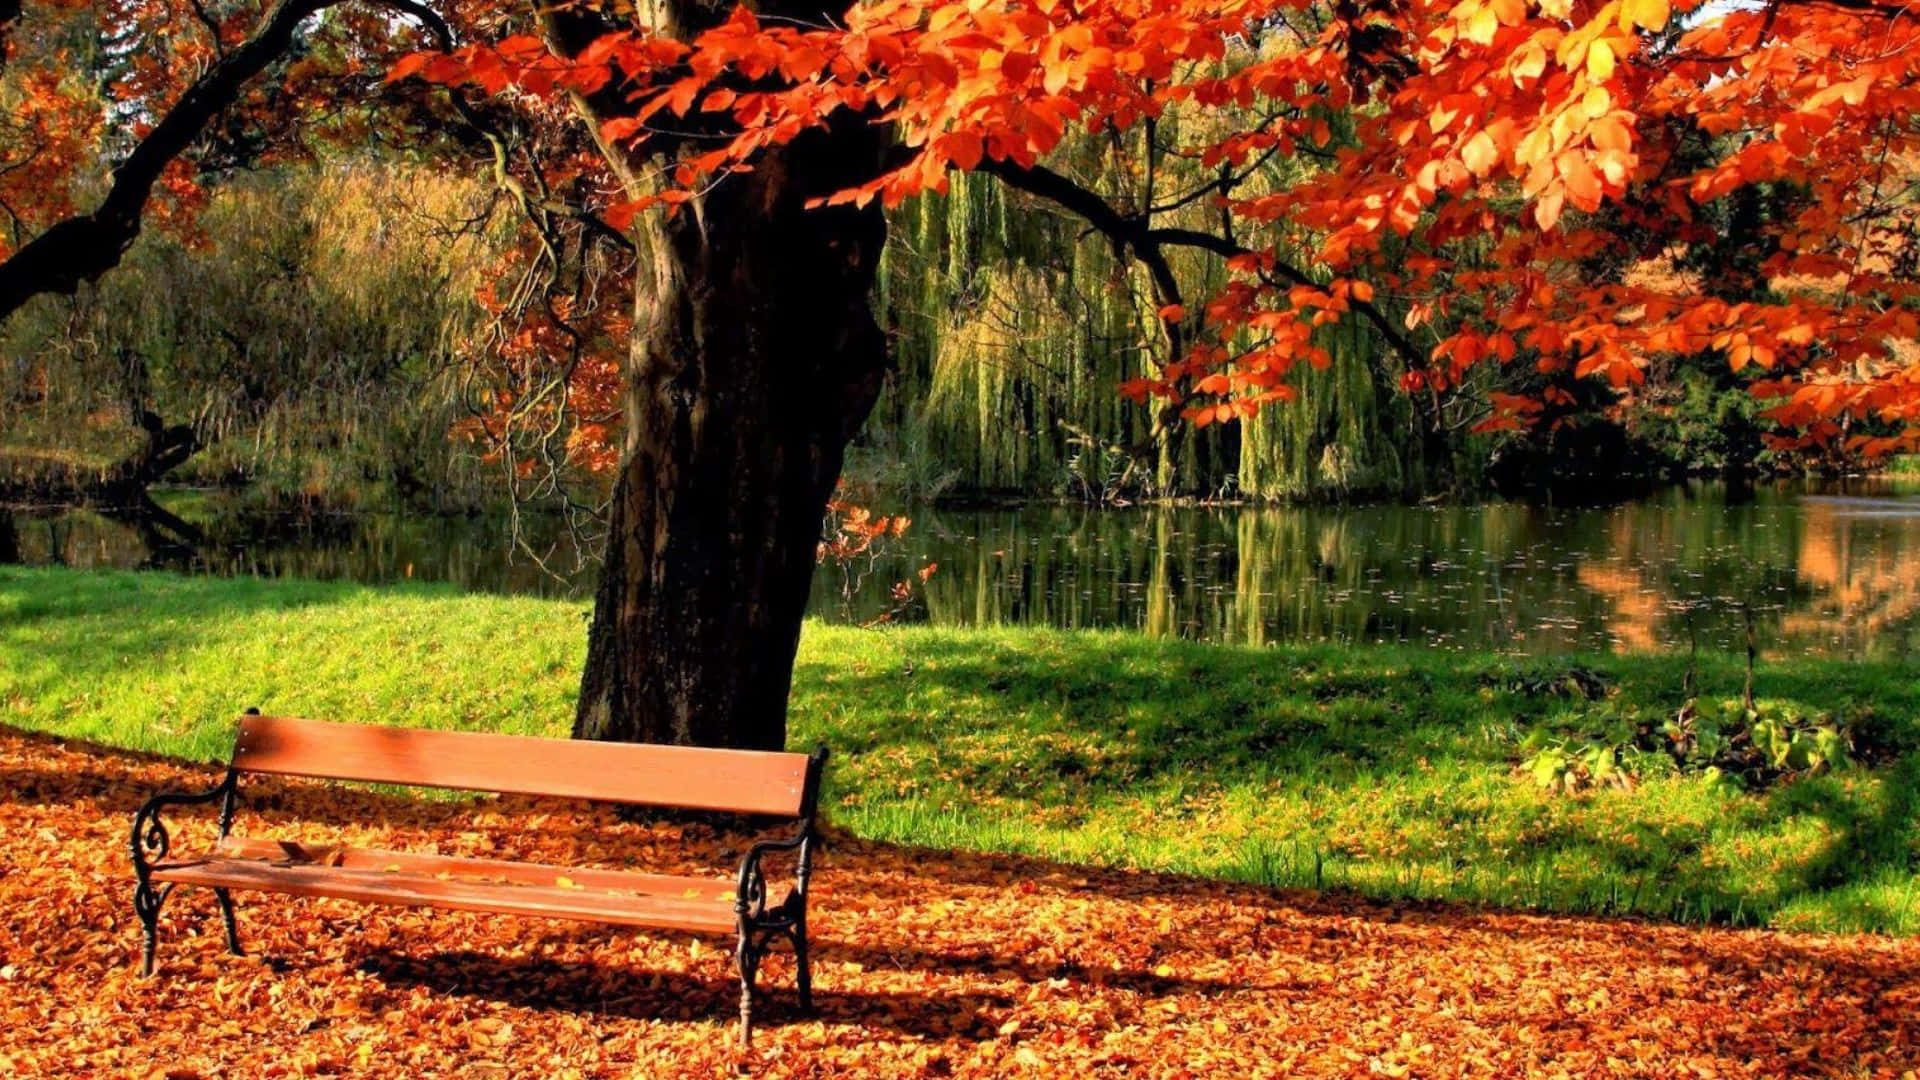 A Bench Is Sitting Under A Tree In The Fall